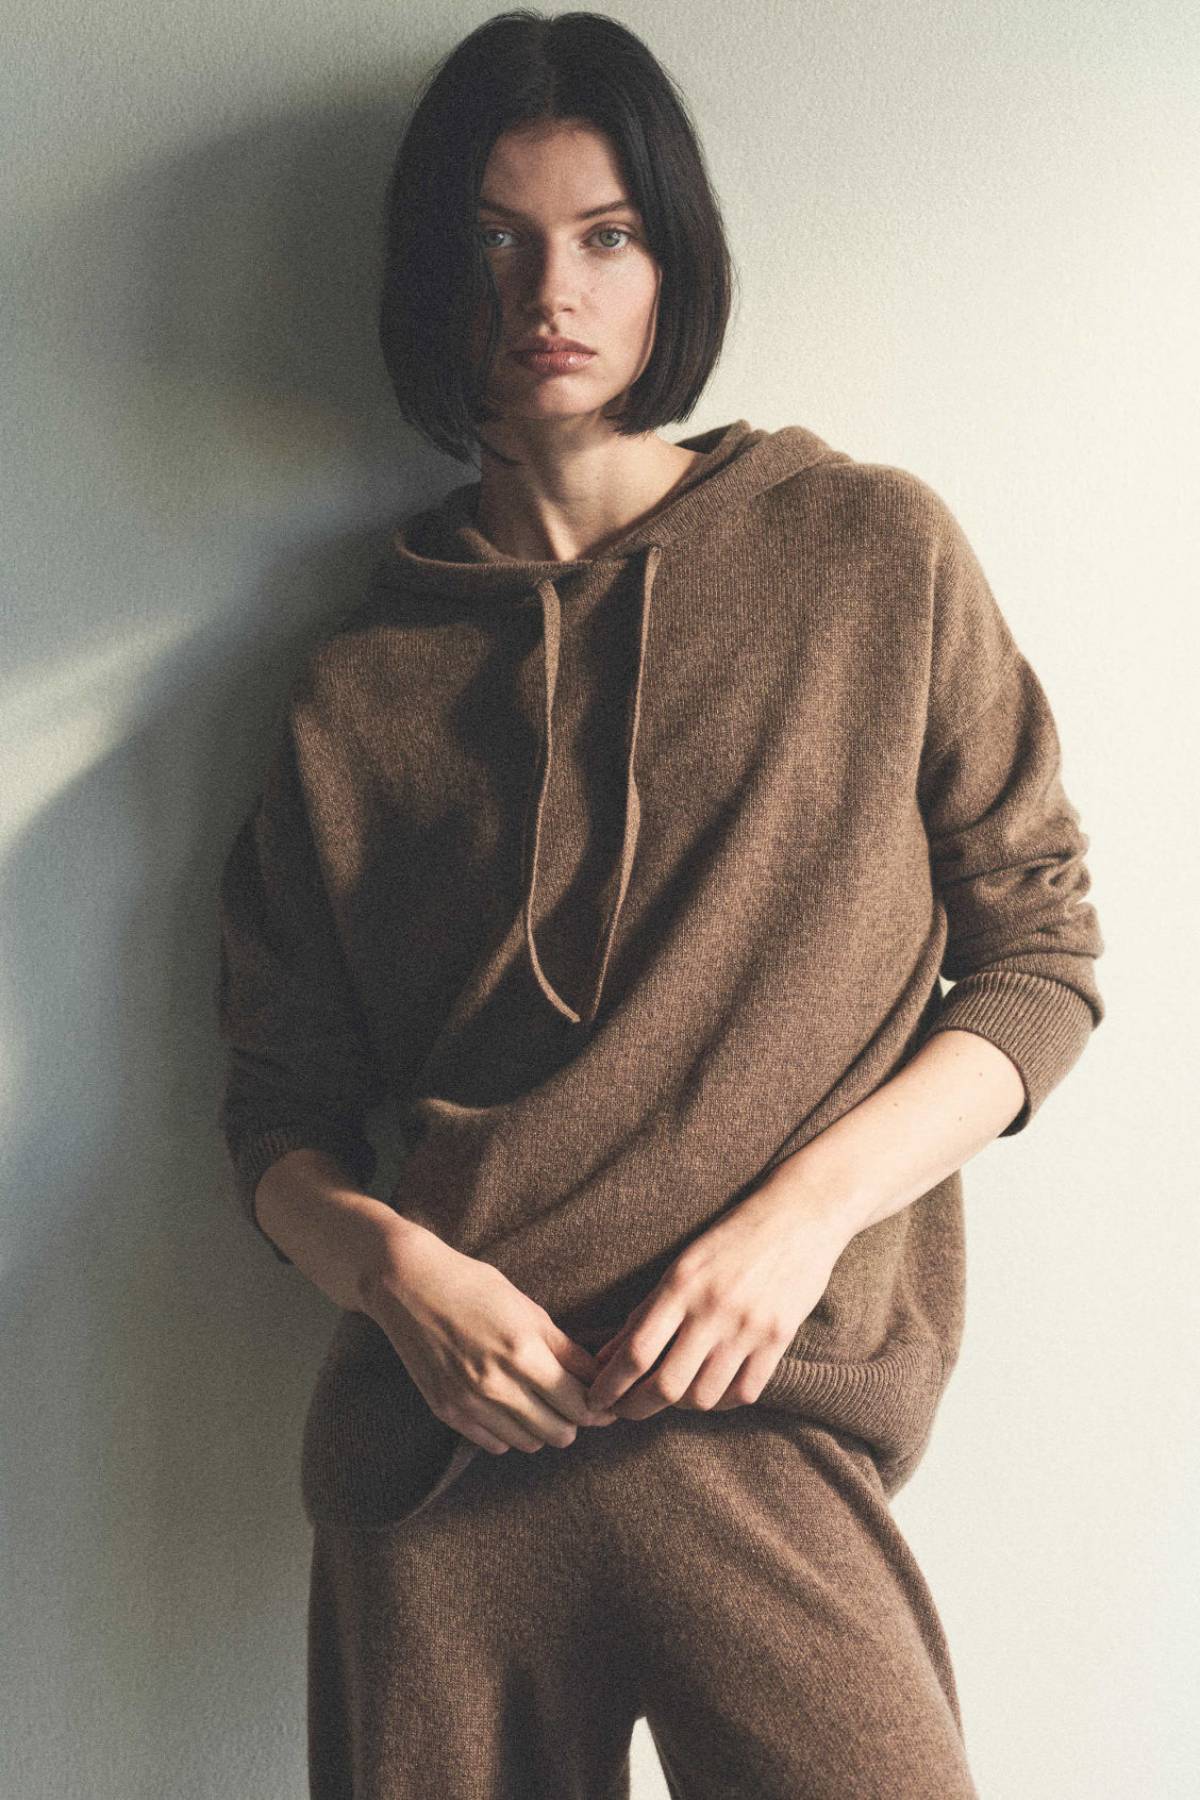 Women's Loungwear Pause by COS Fall-Winter 2021 Ad Campaign Clothing: COS BROWN RELAXED-FIT CASHMERE HOODIE / COS BROWN STRAIGHT-LEG CASHMERE PANTS